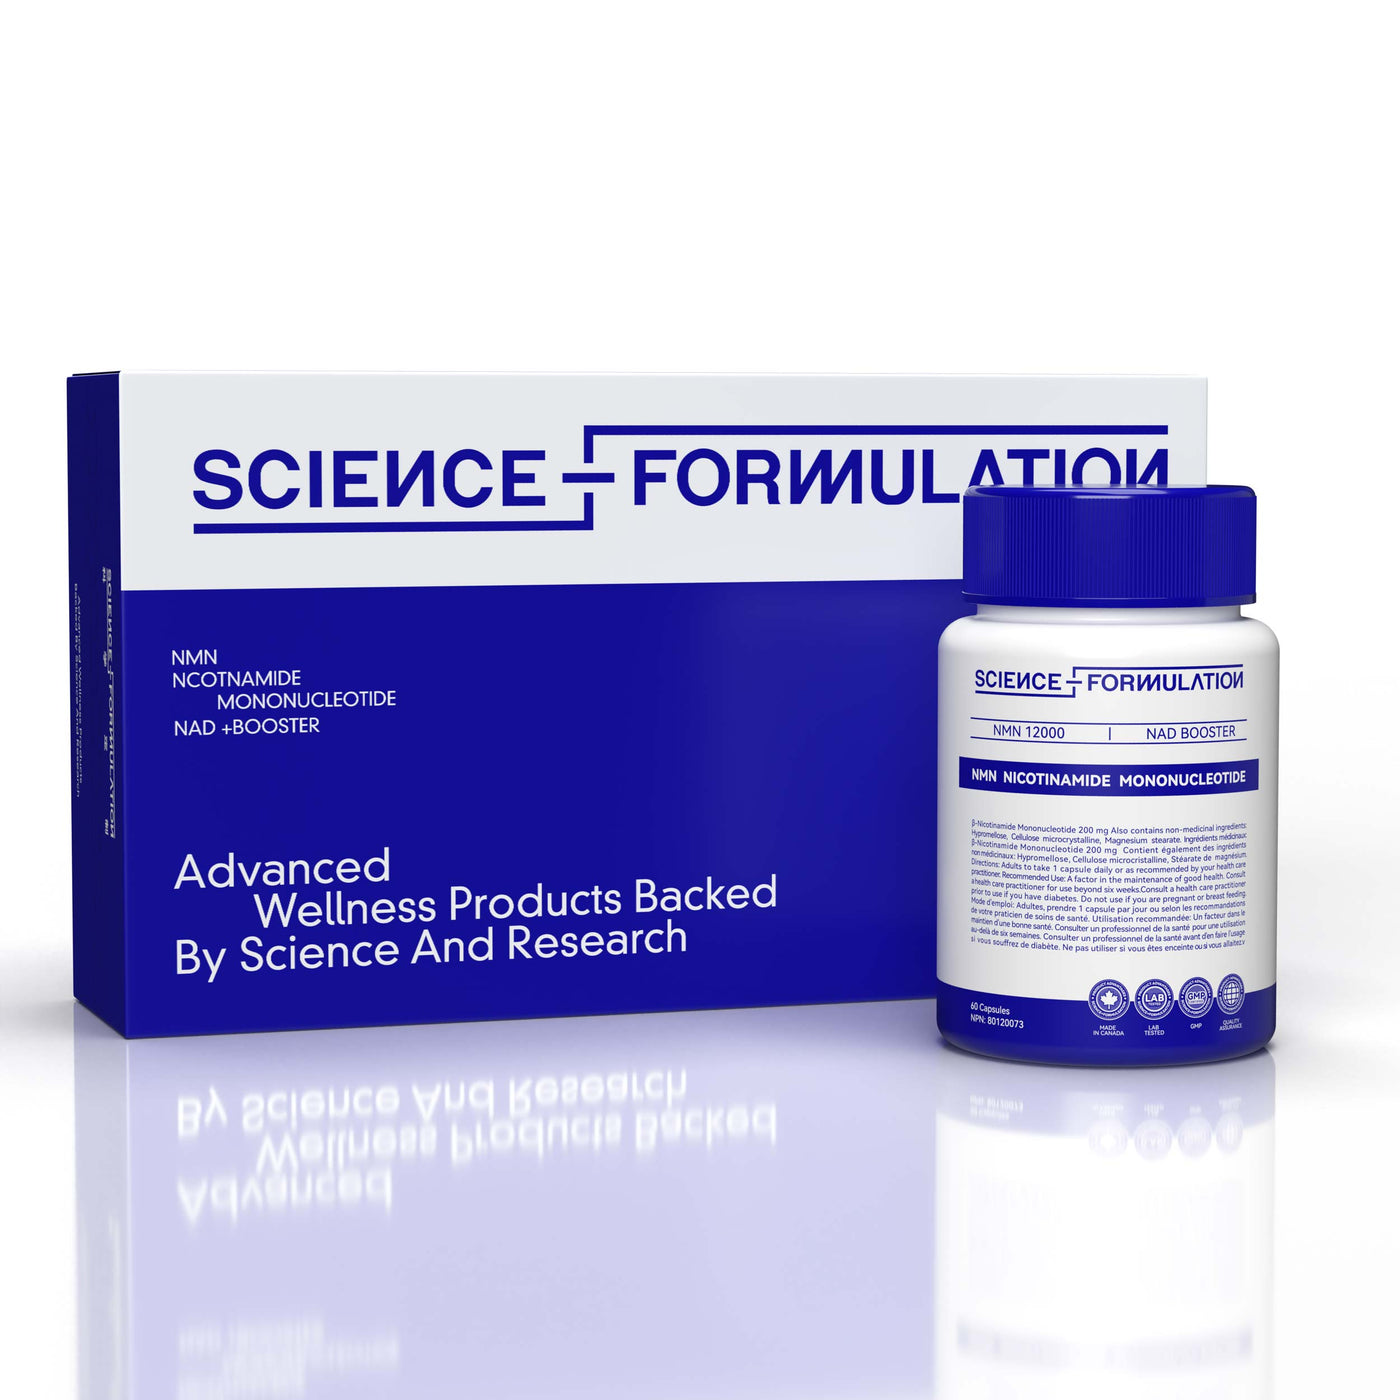 SCIENCE FORMULATION NMN 200mg - Highest Potency Available - Premium Supplement - Cellular Health - Boost NAD+, Supports Longevity - 99.9% Pure - Fast Absorption